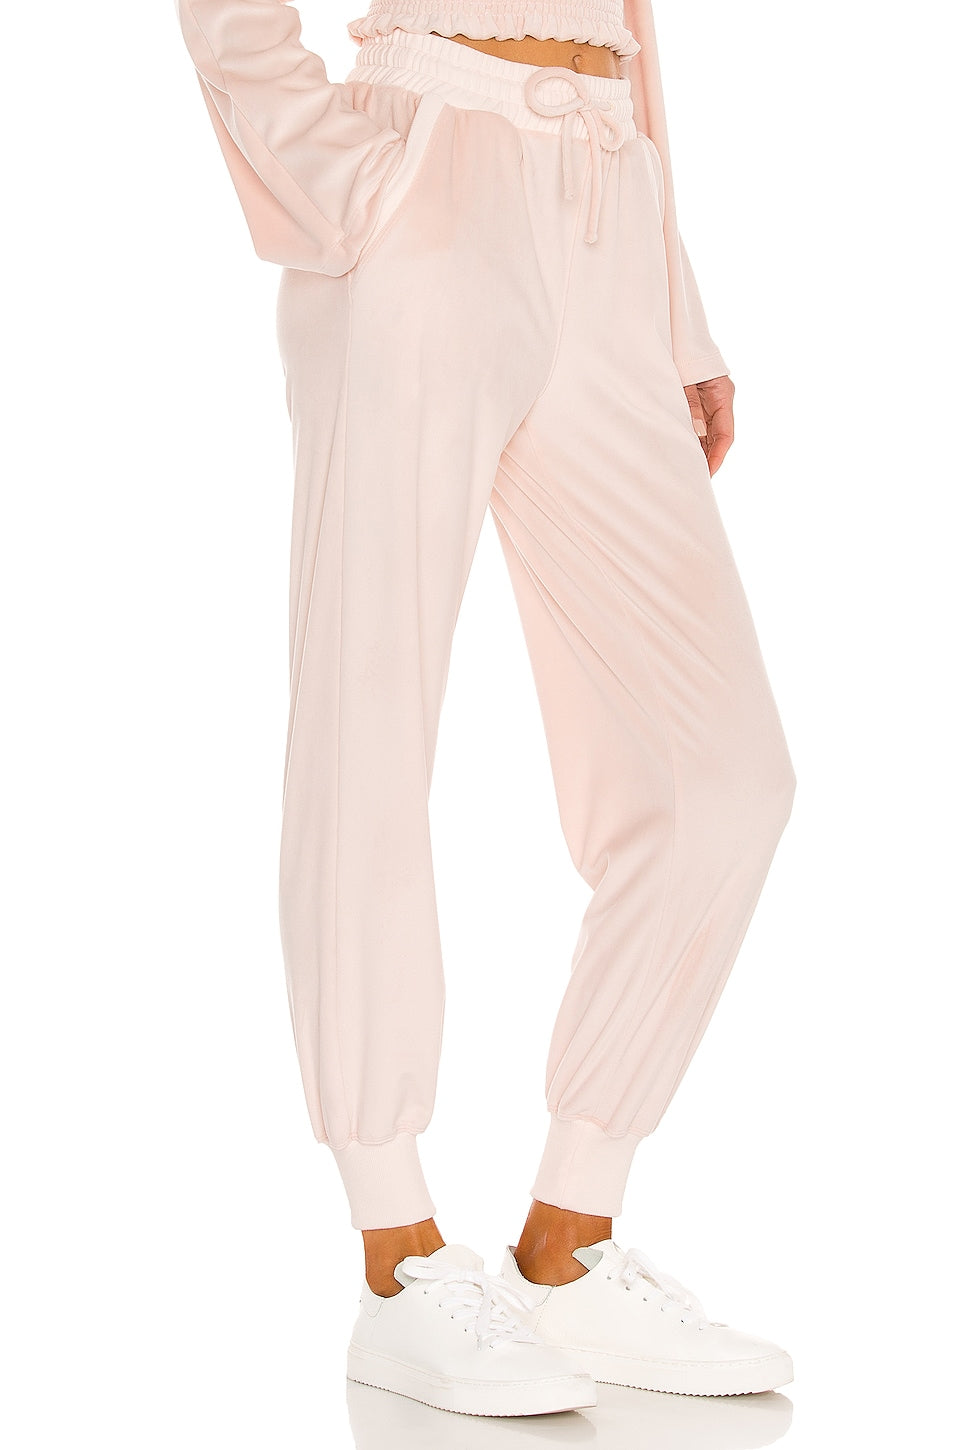 Lovers and Friends Zuma Jogger in Peony Pink Size XXS